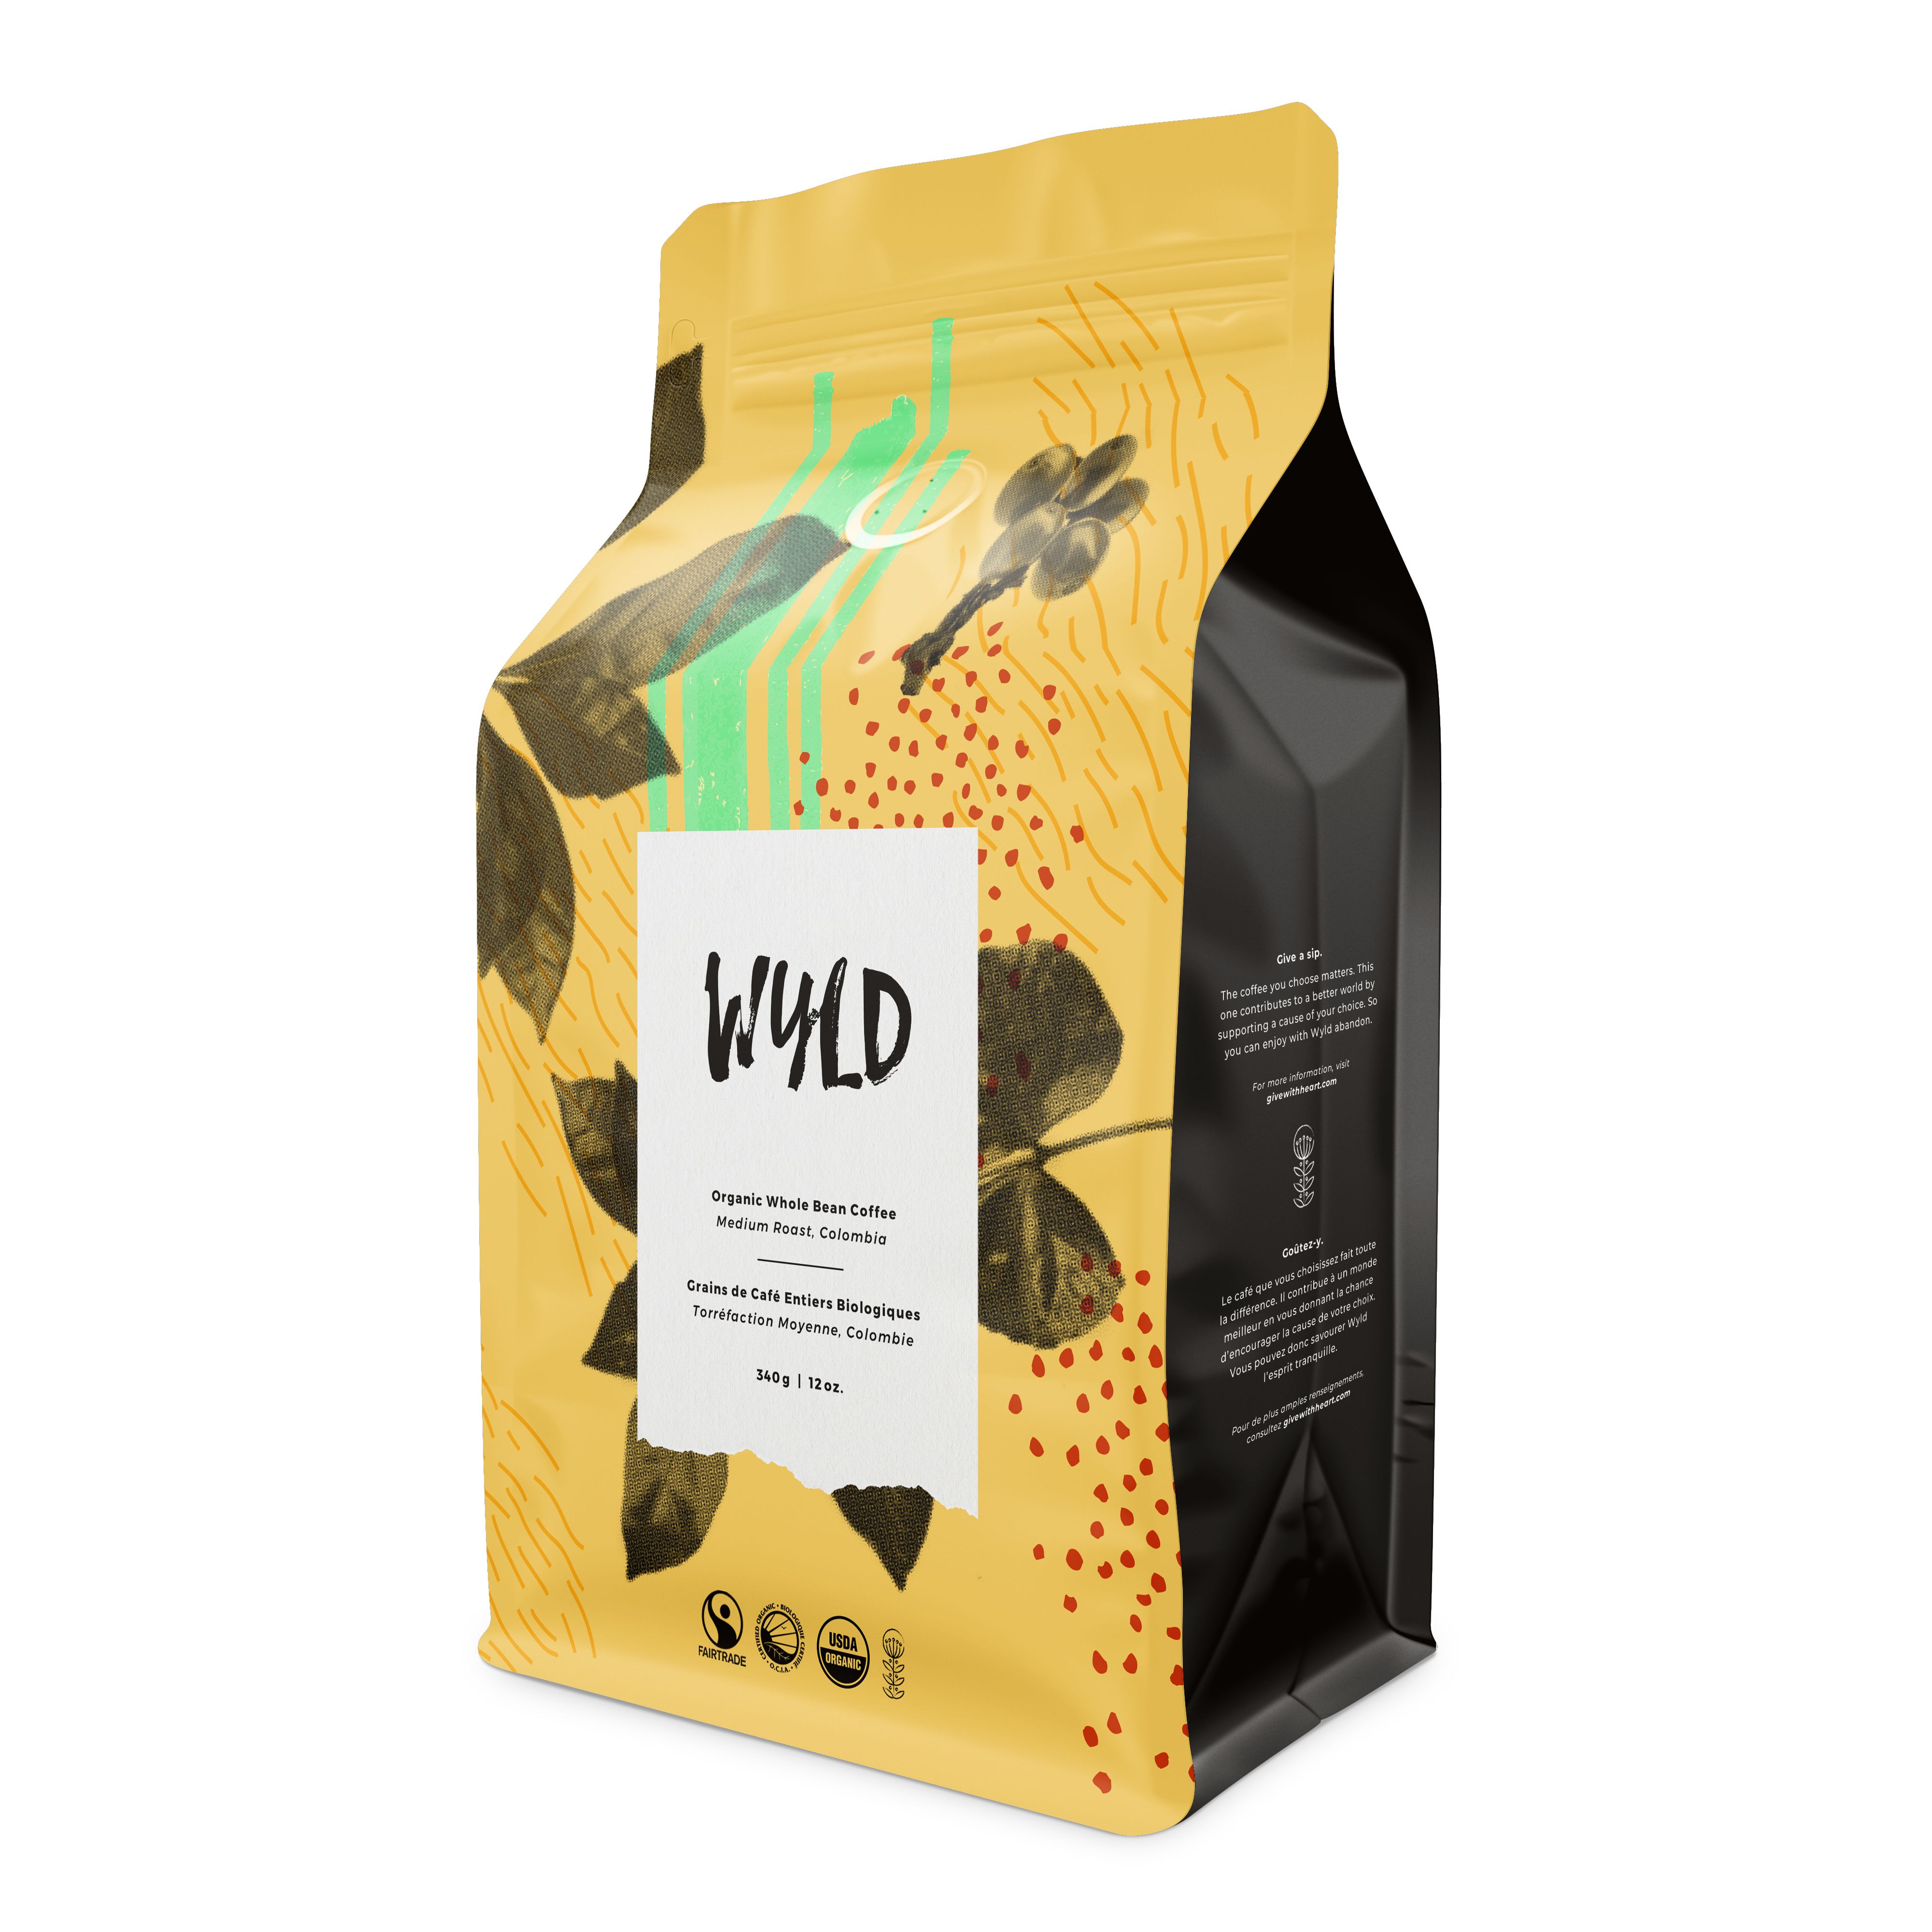 Certified Fair Trade Organic Coffee by Toronto's Wyld Coffee Co. - Medium Roast, Colombia 340g. Roasted locally in small batches to ensure freshness